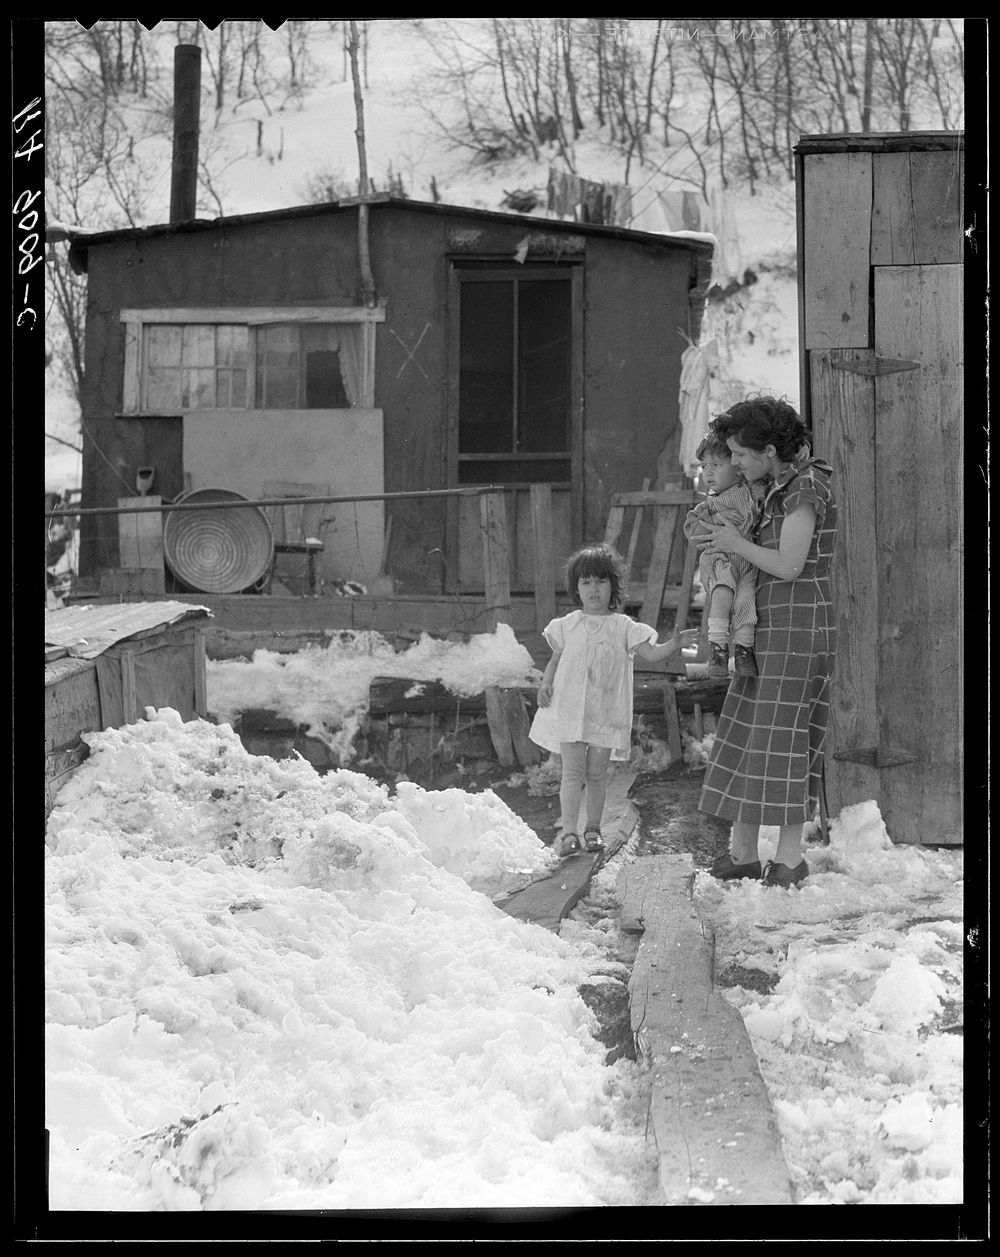 Home and family of a Utah coal miner. Consumers, near Price, Utah. Sourced from the Library of Congress.